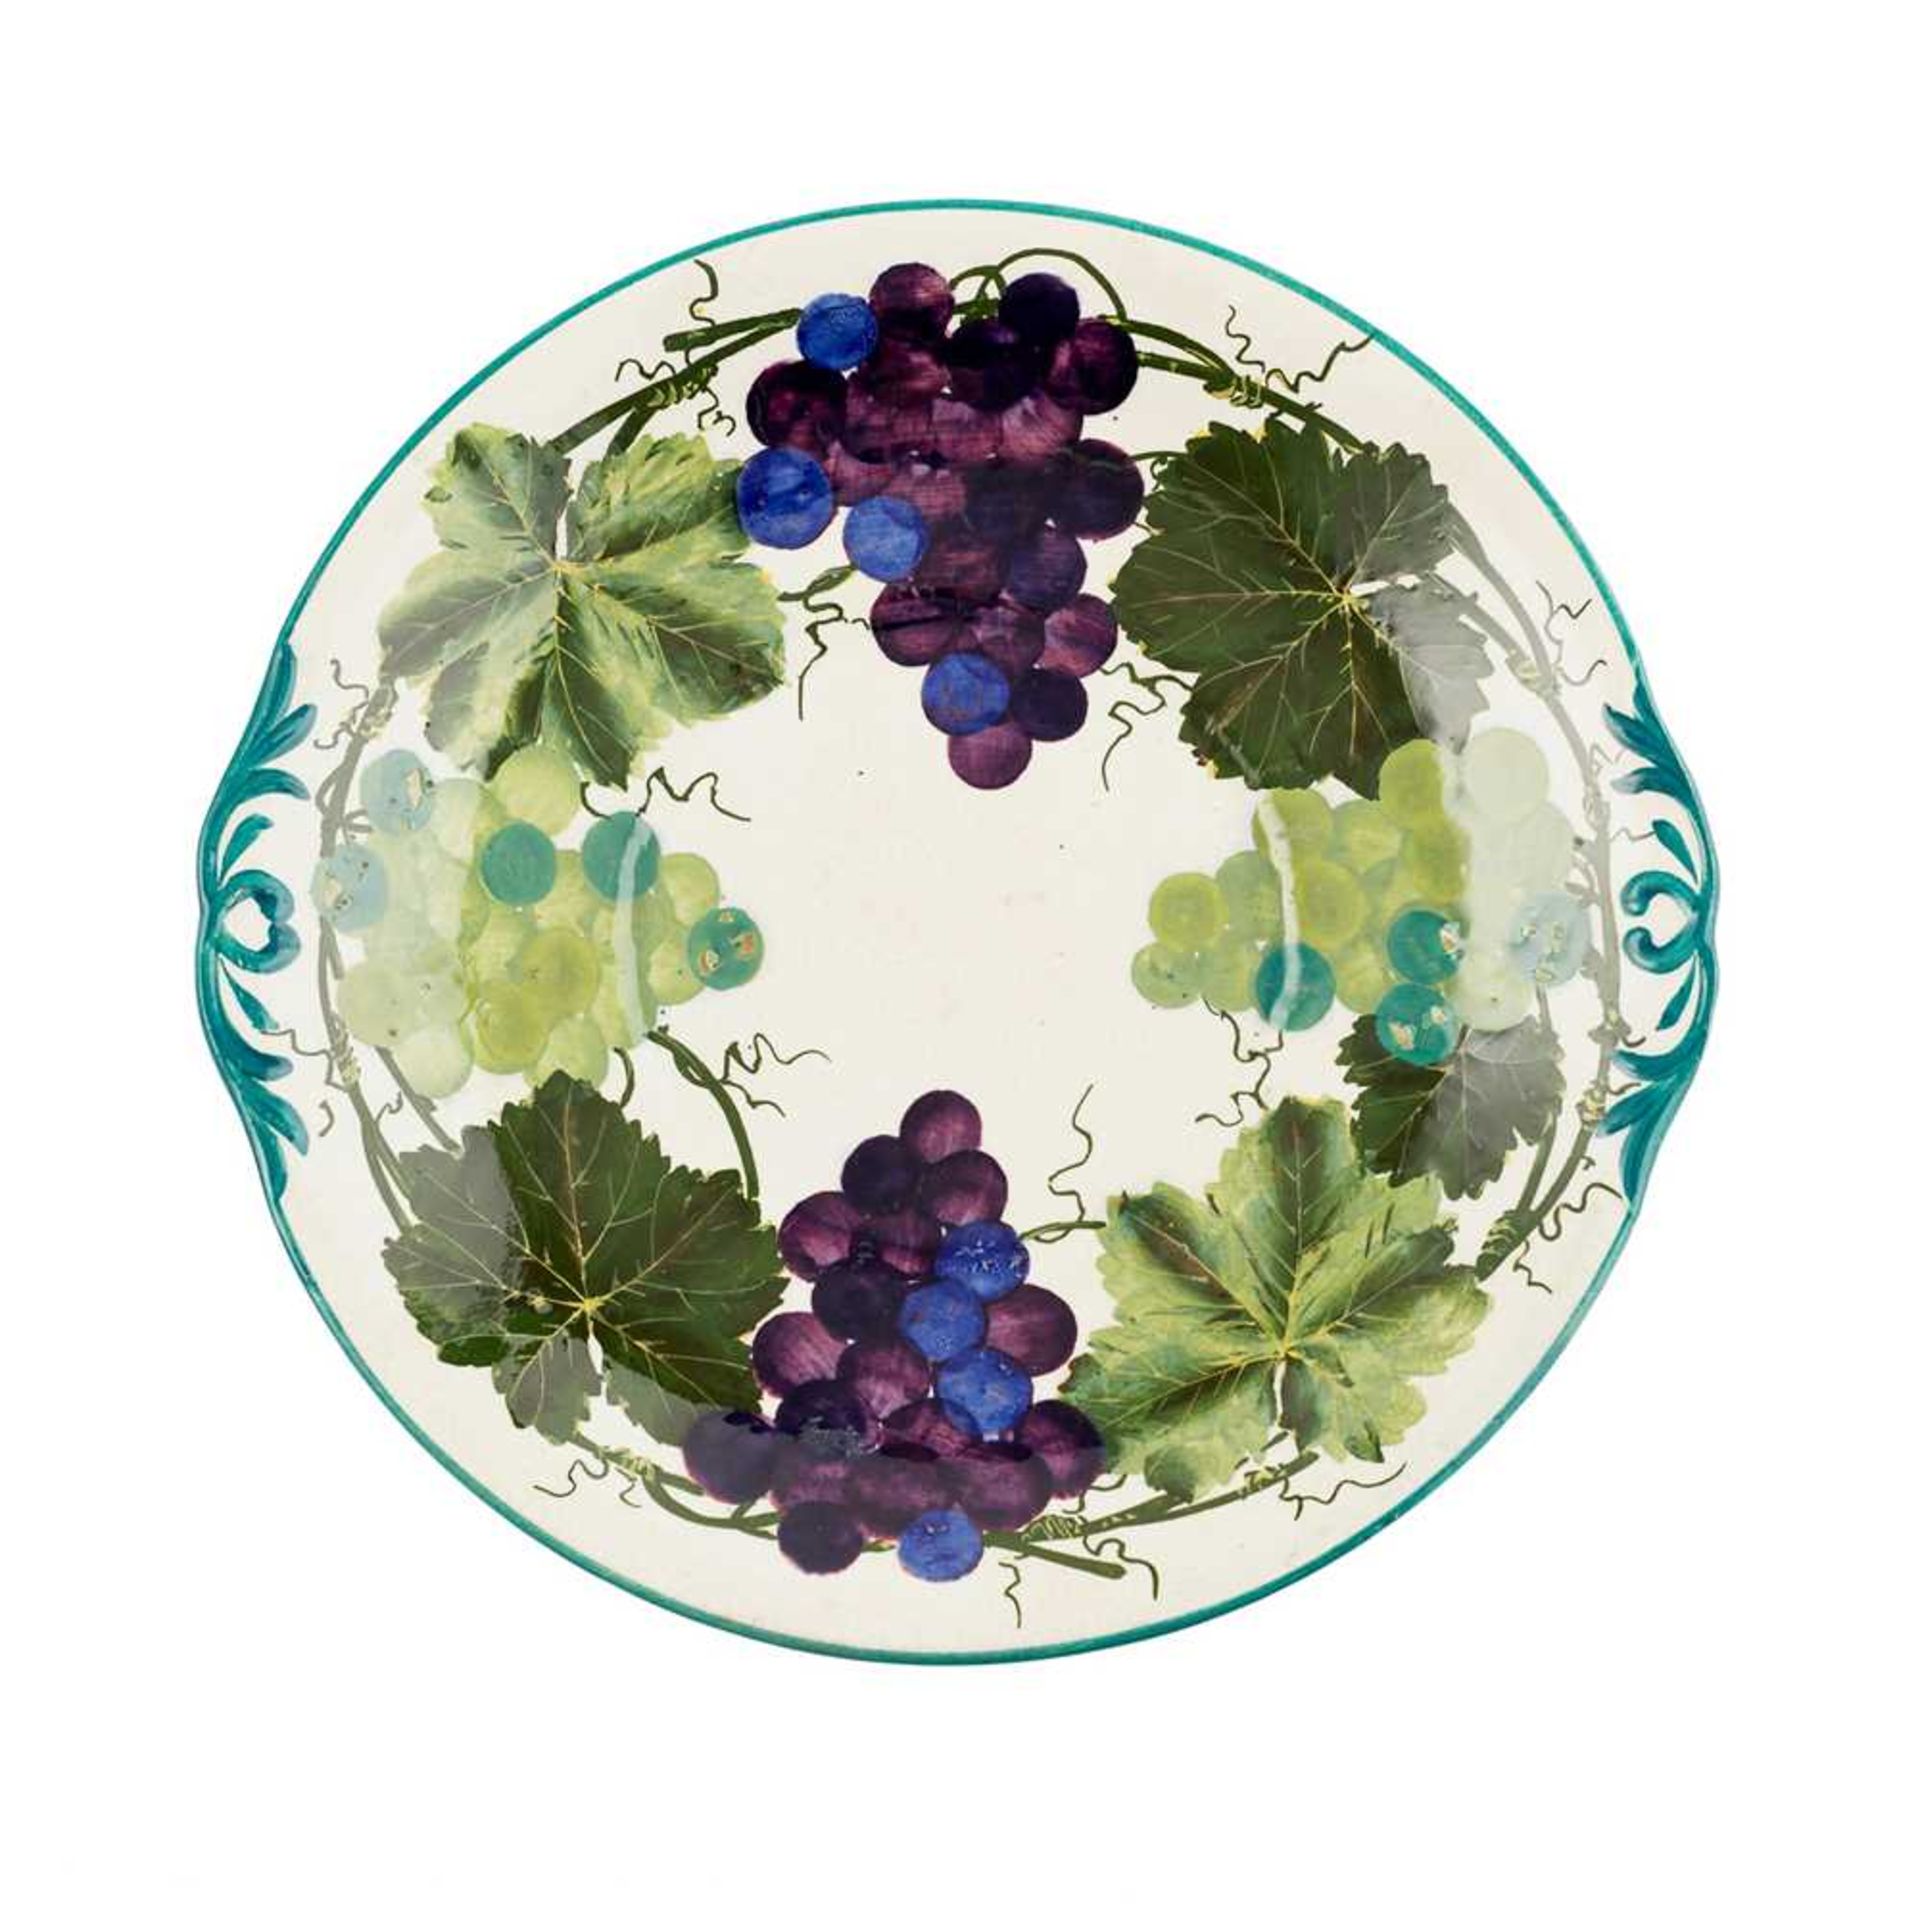 A RARE WEMYSS WARE BREAD AND BUTTER PLATE 'GRAPES' PATTERN, EARLY 20TH CENTURY